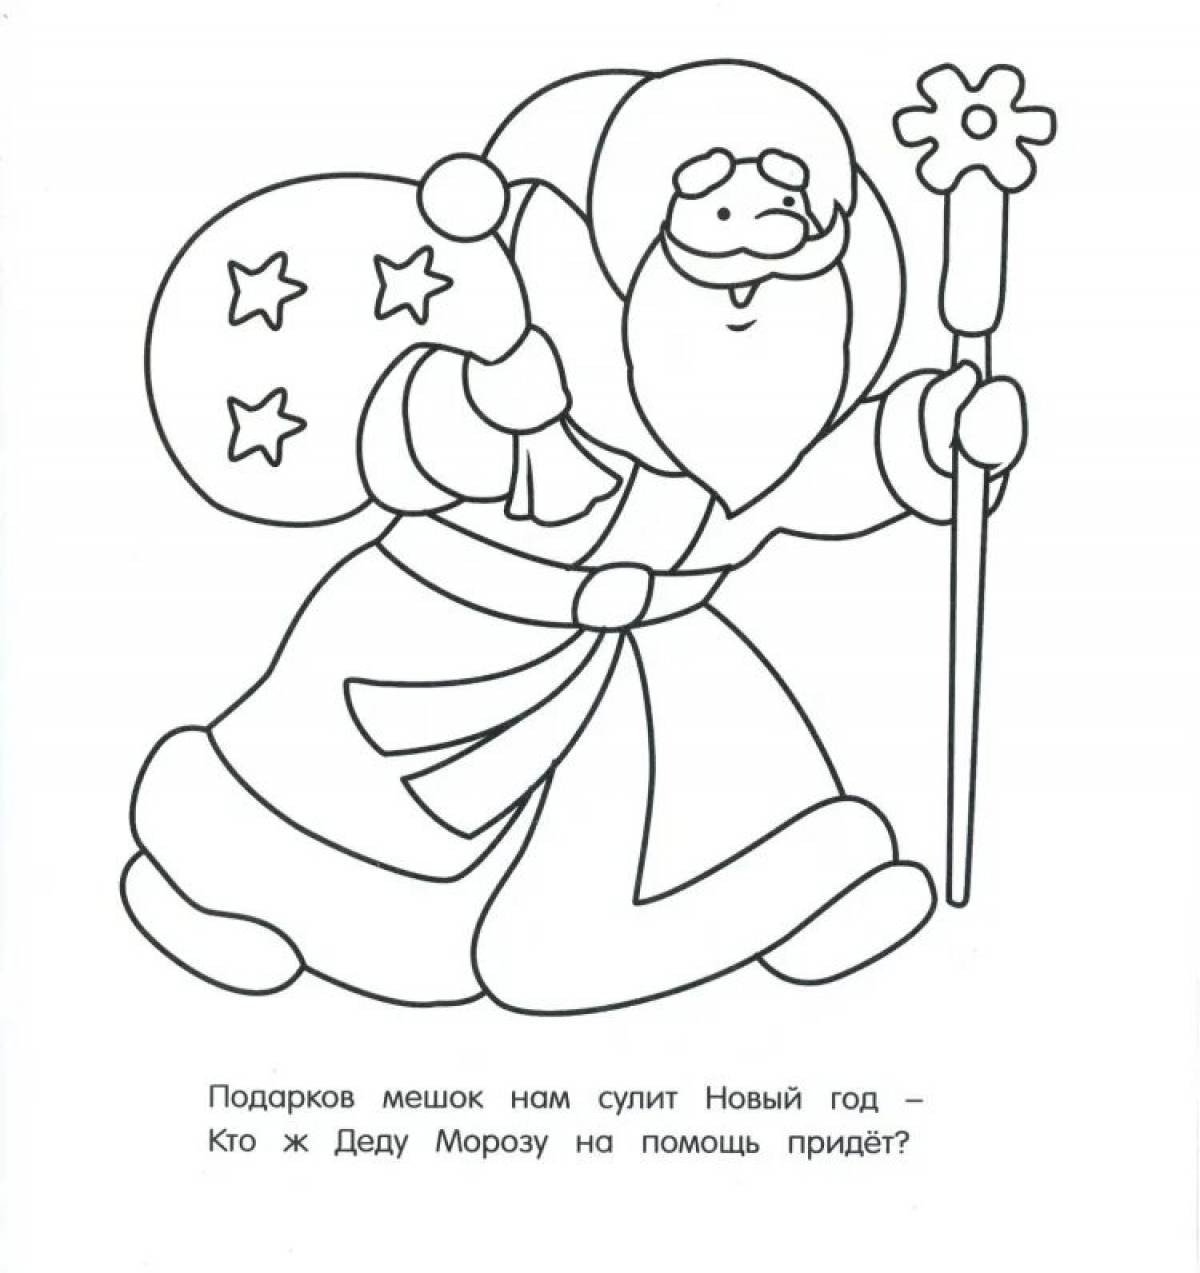 Animated drawing of Santa Claus and Snow Maiden